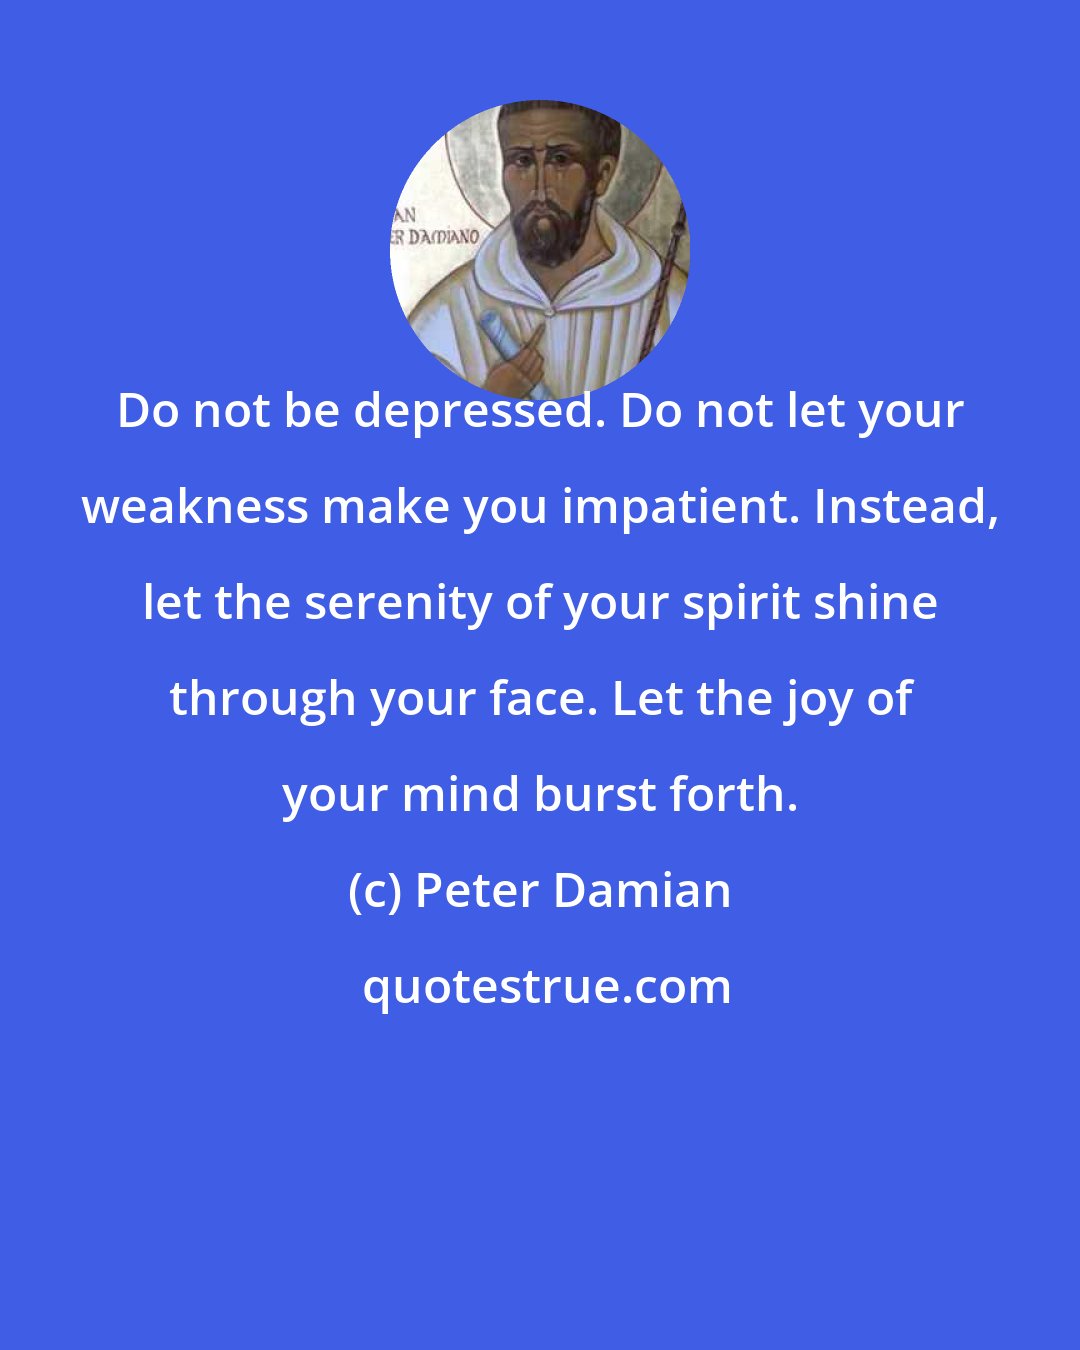 Peter Damian: Do not be depressed. Do not let your weakness make you impatient. Instead, let the serenity of your spirit shine through your face. Let the joy of your mind burst forth.